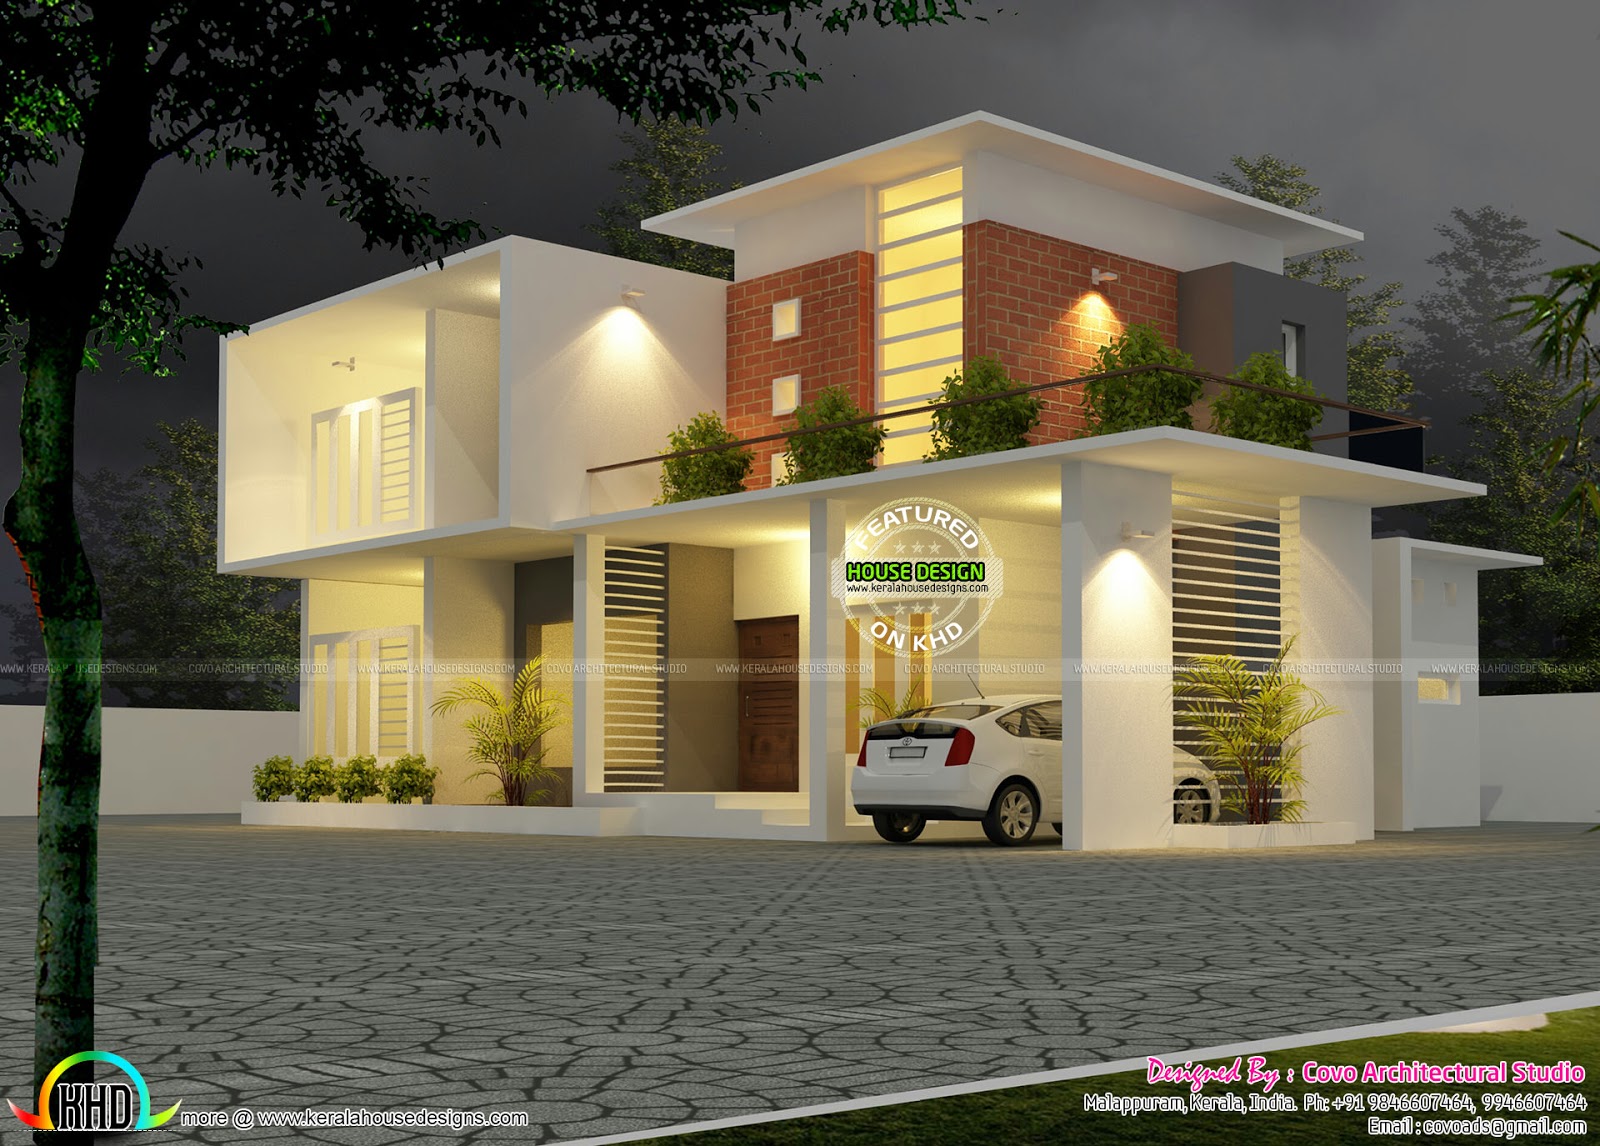  2500  sq  ft  home  Kerala  home  design  and floor plans 